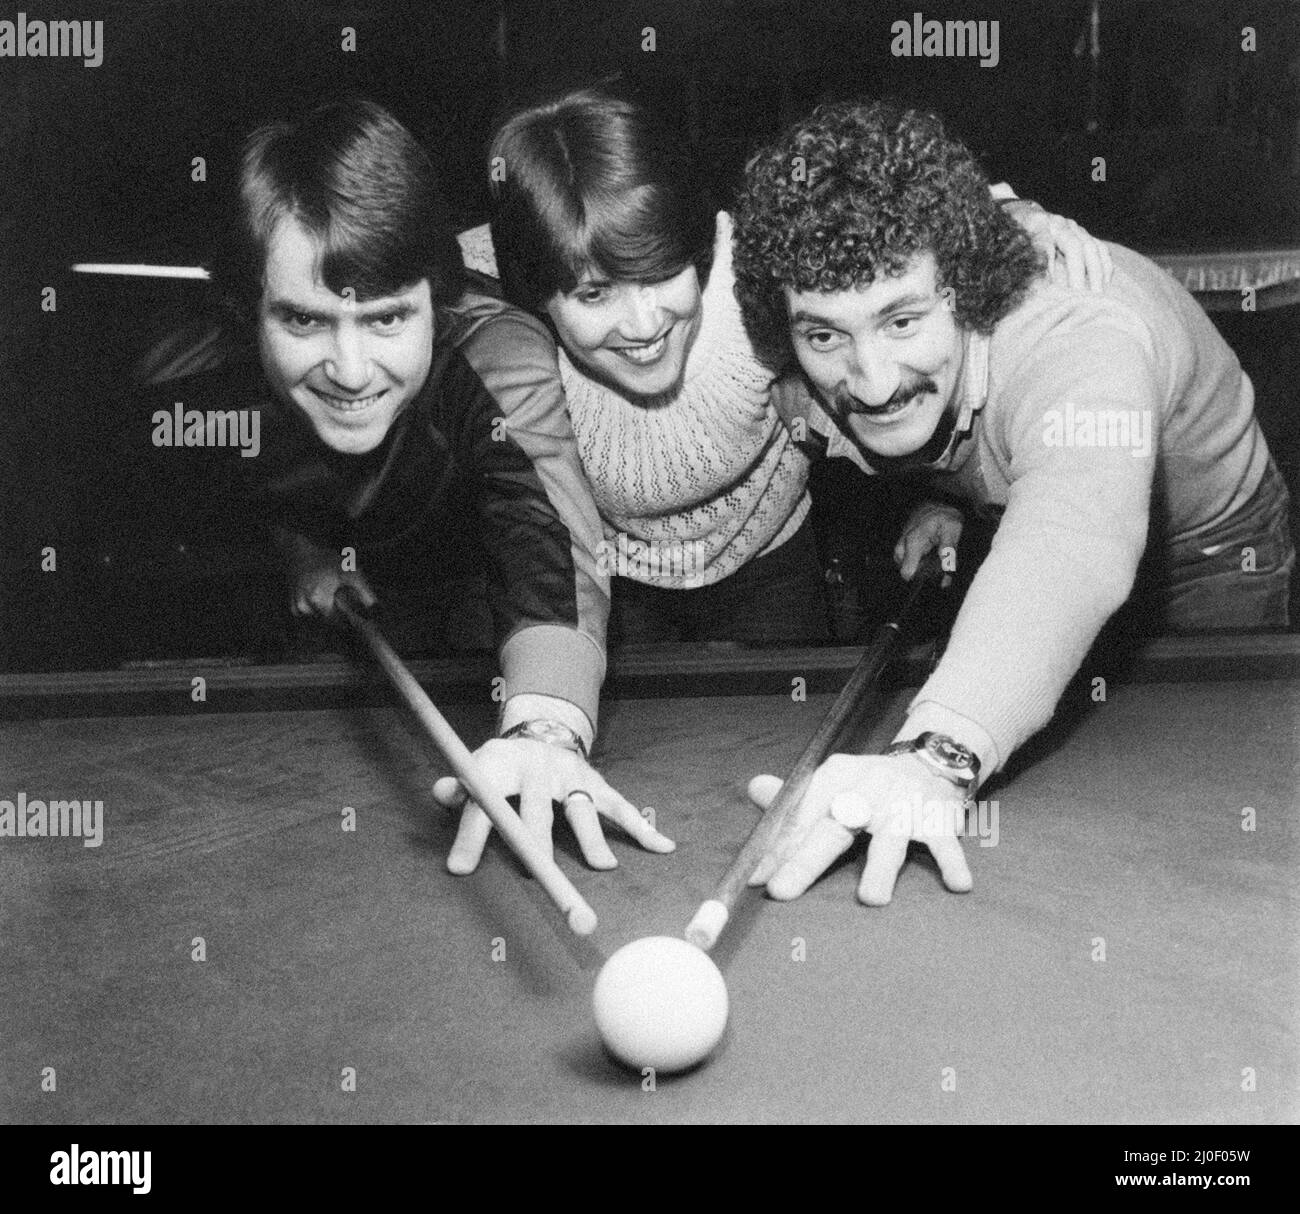 Terry McDermott, Liverpool Midfielder, pictured with girlfriend Val Wilcock and her brother Bob, playing snooker at Bury Social Club, 11th February 1980. Stock Photo